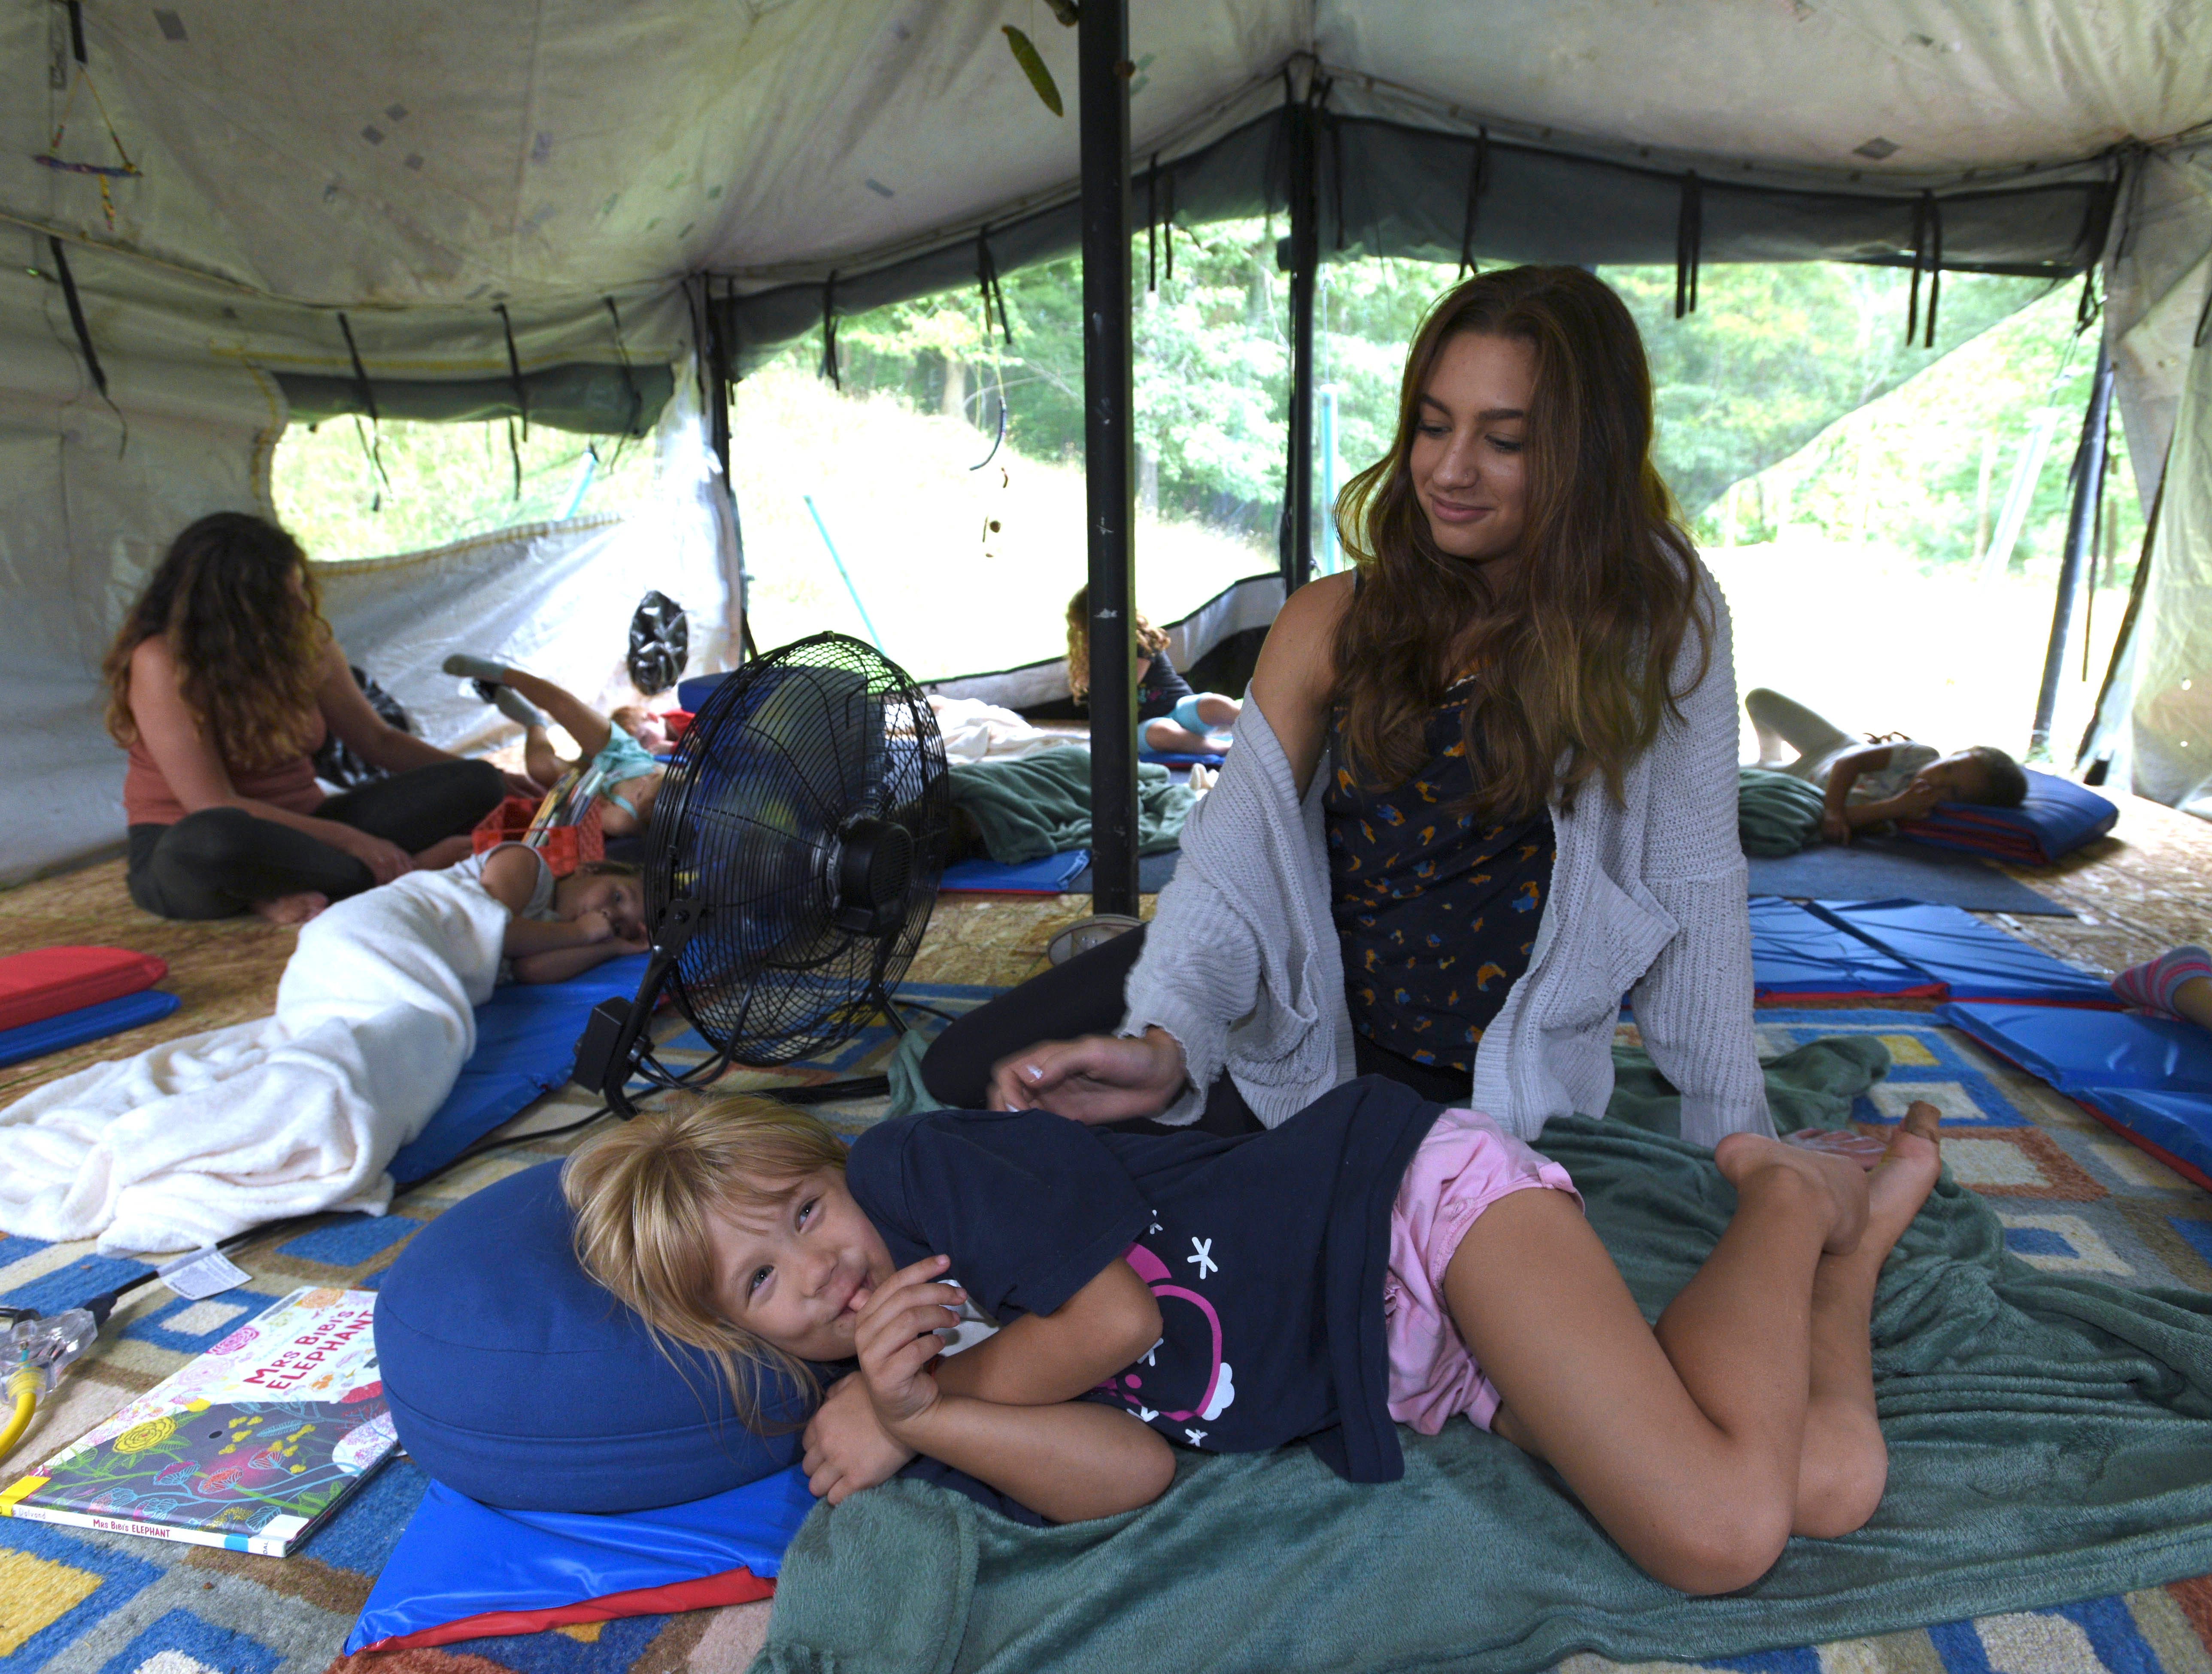 Teacher's aid Olivia Zeiman, right, of Clarkston, rubs the back of six-year-older Daphne Harvat, of Rochester, during nap time in the tent of teacher Melissa Gervais, left, of Oxford.